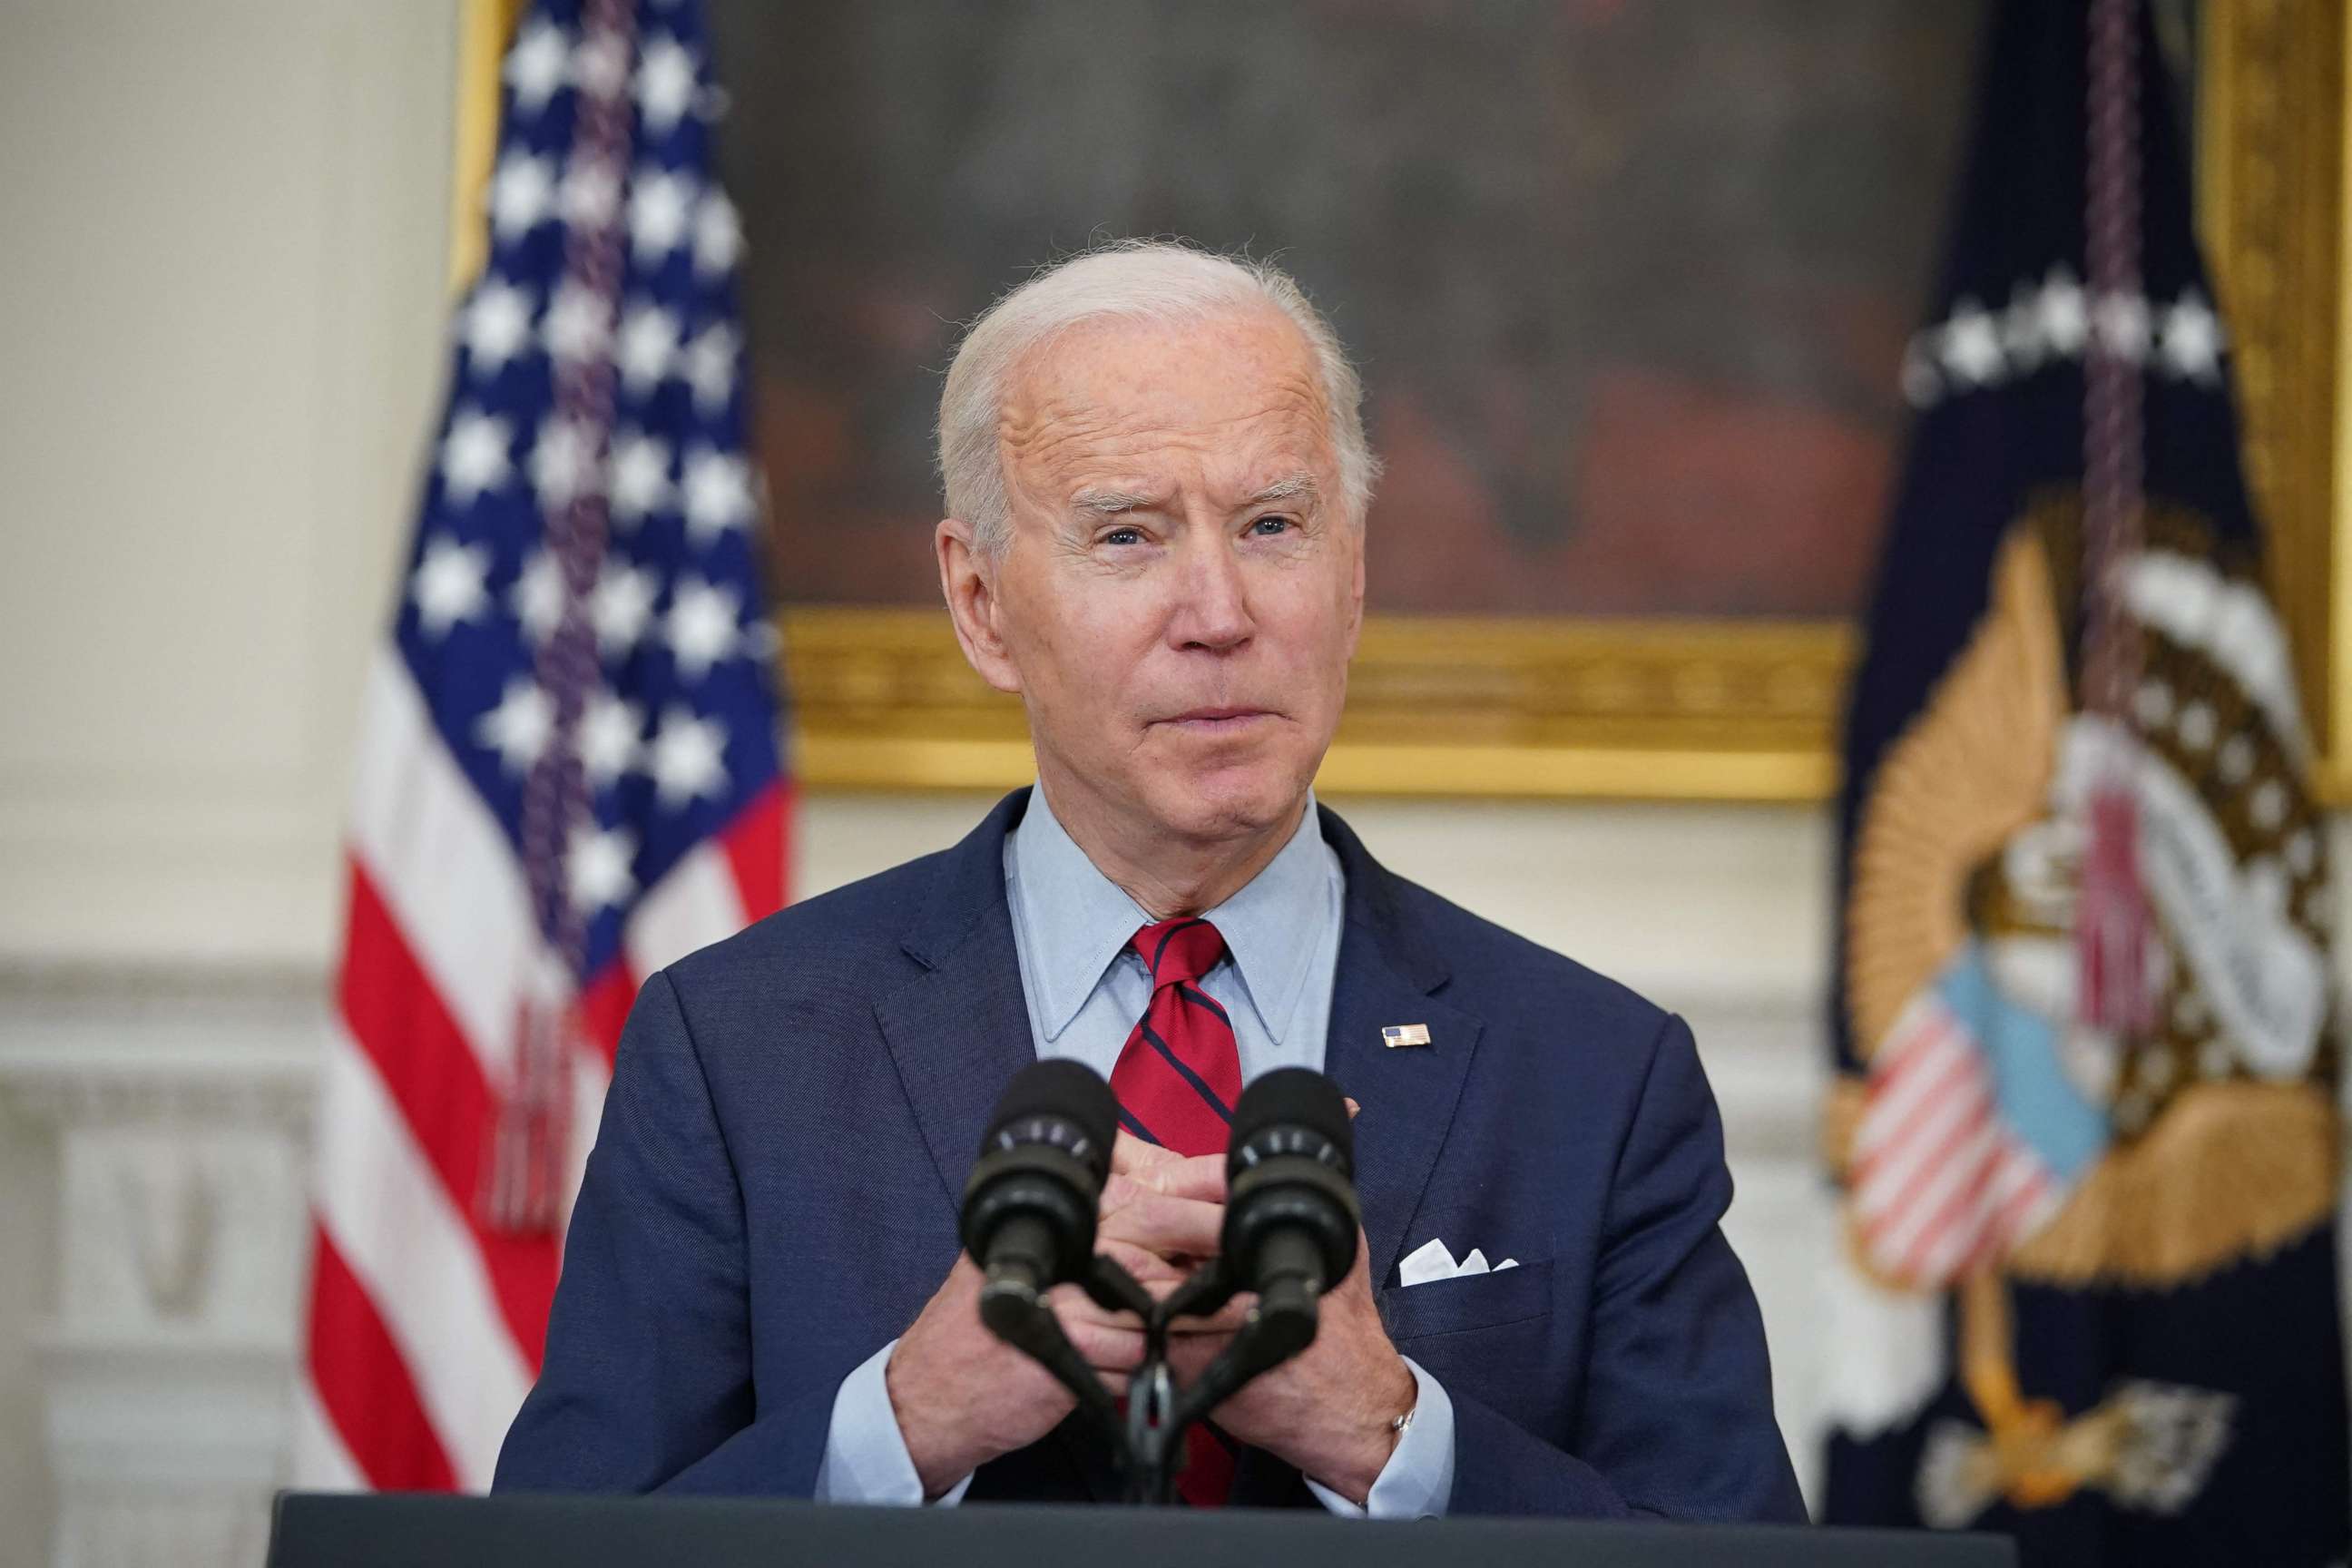 PHOTO: President Joe Biden speaks about the Colorado shootings in the State Dining Room of the White House in Washington, DC, March 23, 2021.